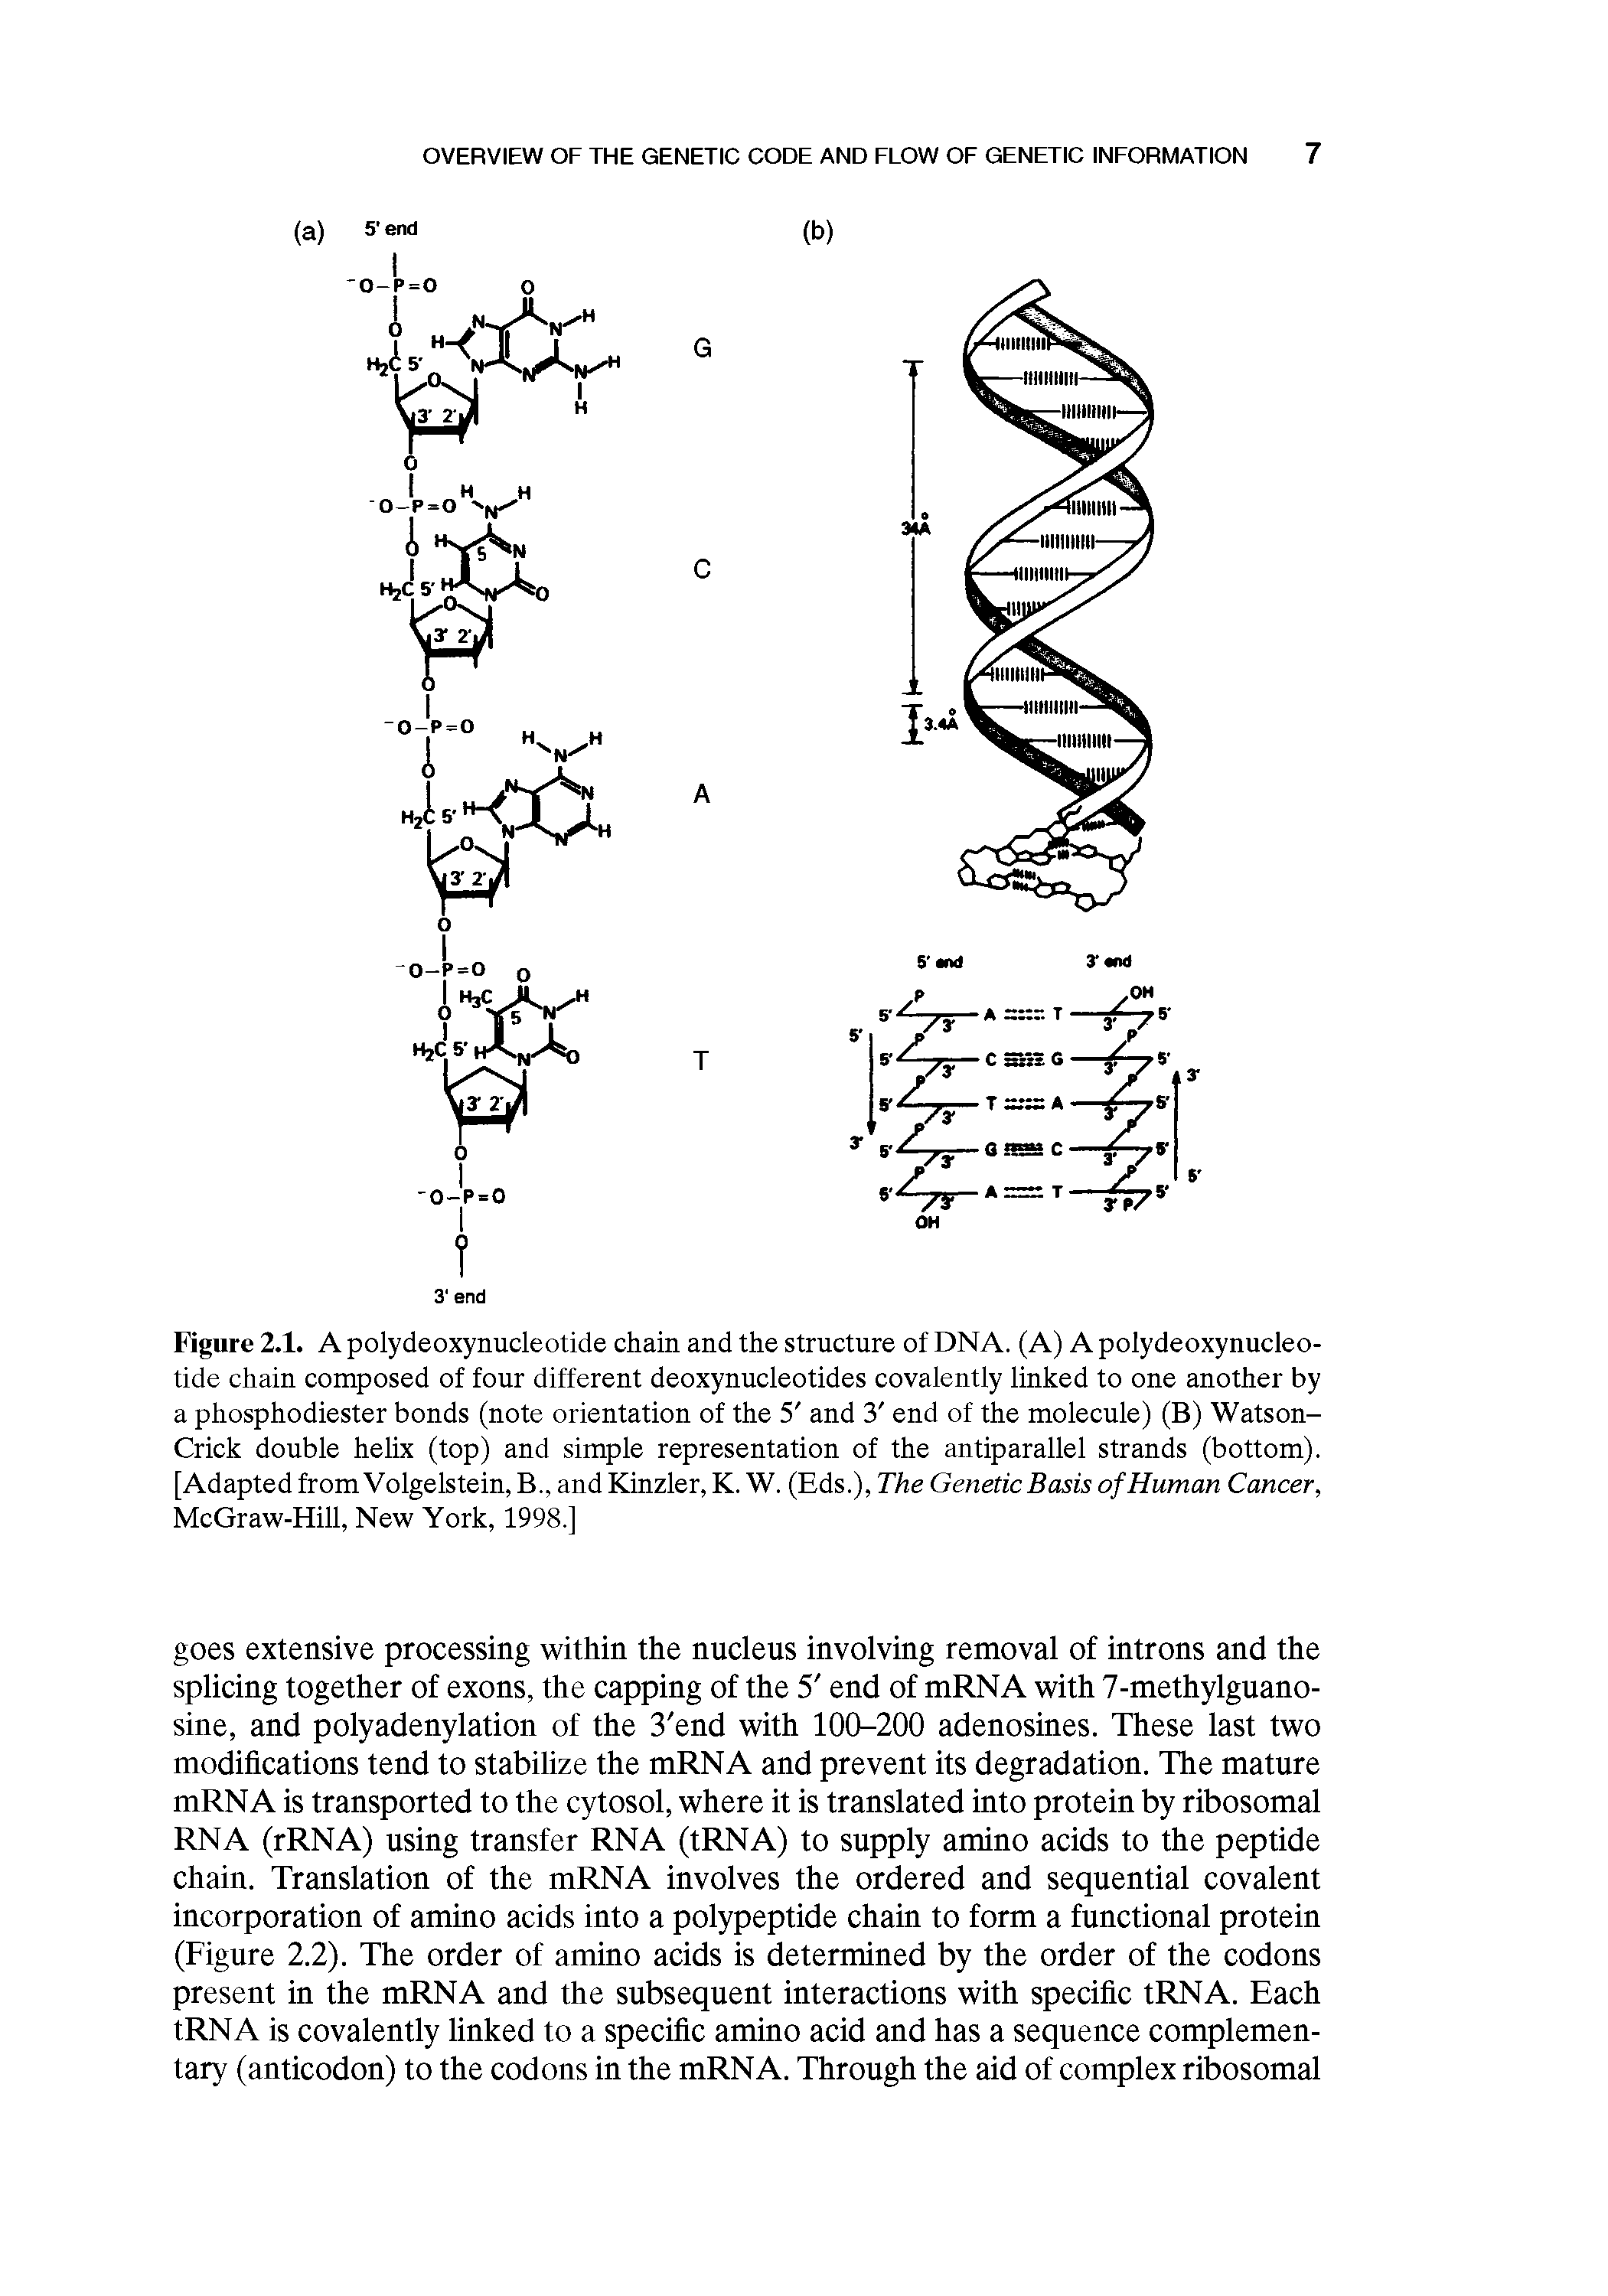 Figure 2.1. A polydeoxynucleotide chain and the structure of DNA. (A) A polydeoxynucleo-tide chain composed of four different deoxynucleotides covalently linked to one another by a phosphodiester bonds (note orientation of the 5 and 3 end of the molecule) (B) Watson-Crick double helix (top) and simple representation of the antiparallel strands (bottom). [Adapted from Volgelstein, B., and Kinzler, K. W. (Eds.), The Genetic Basis of Human Cancer, McGraw-Hill, New York, 1998.]...